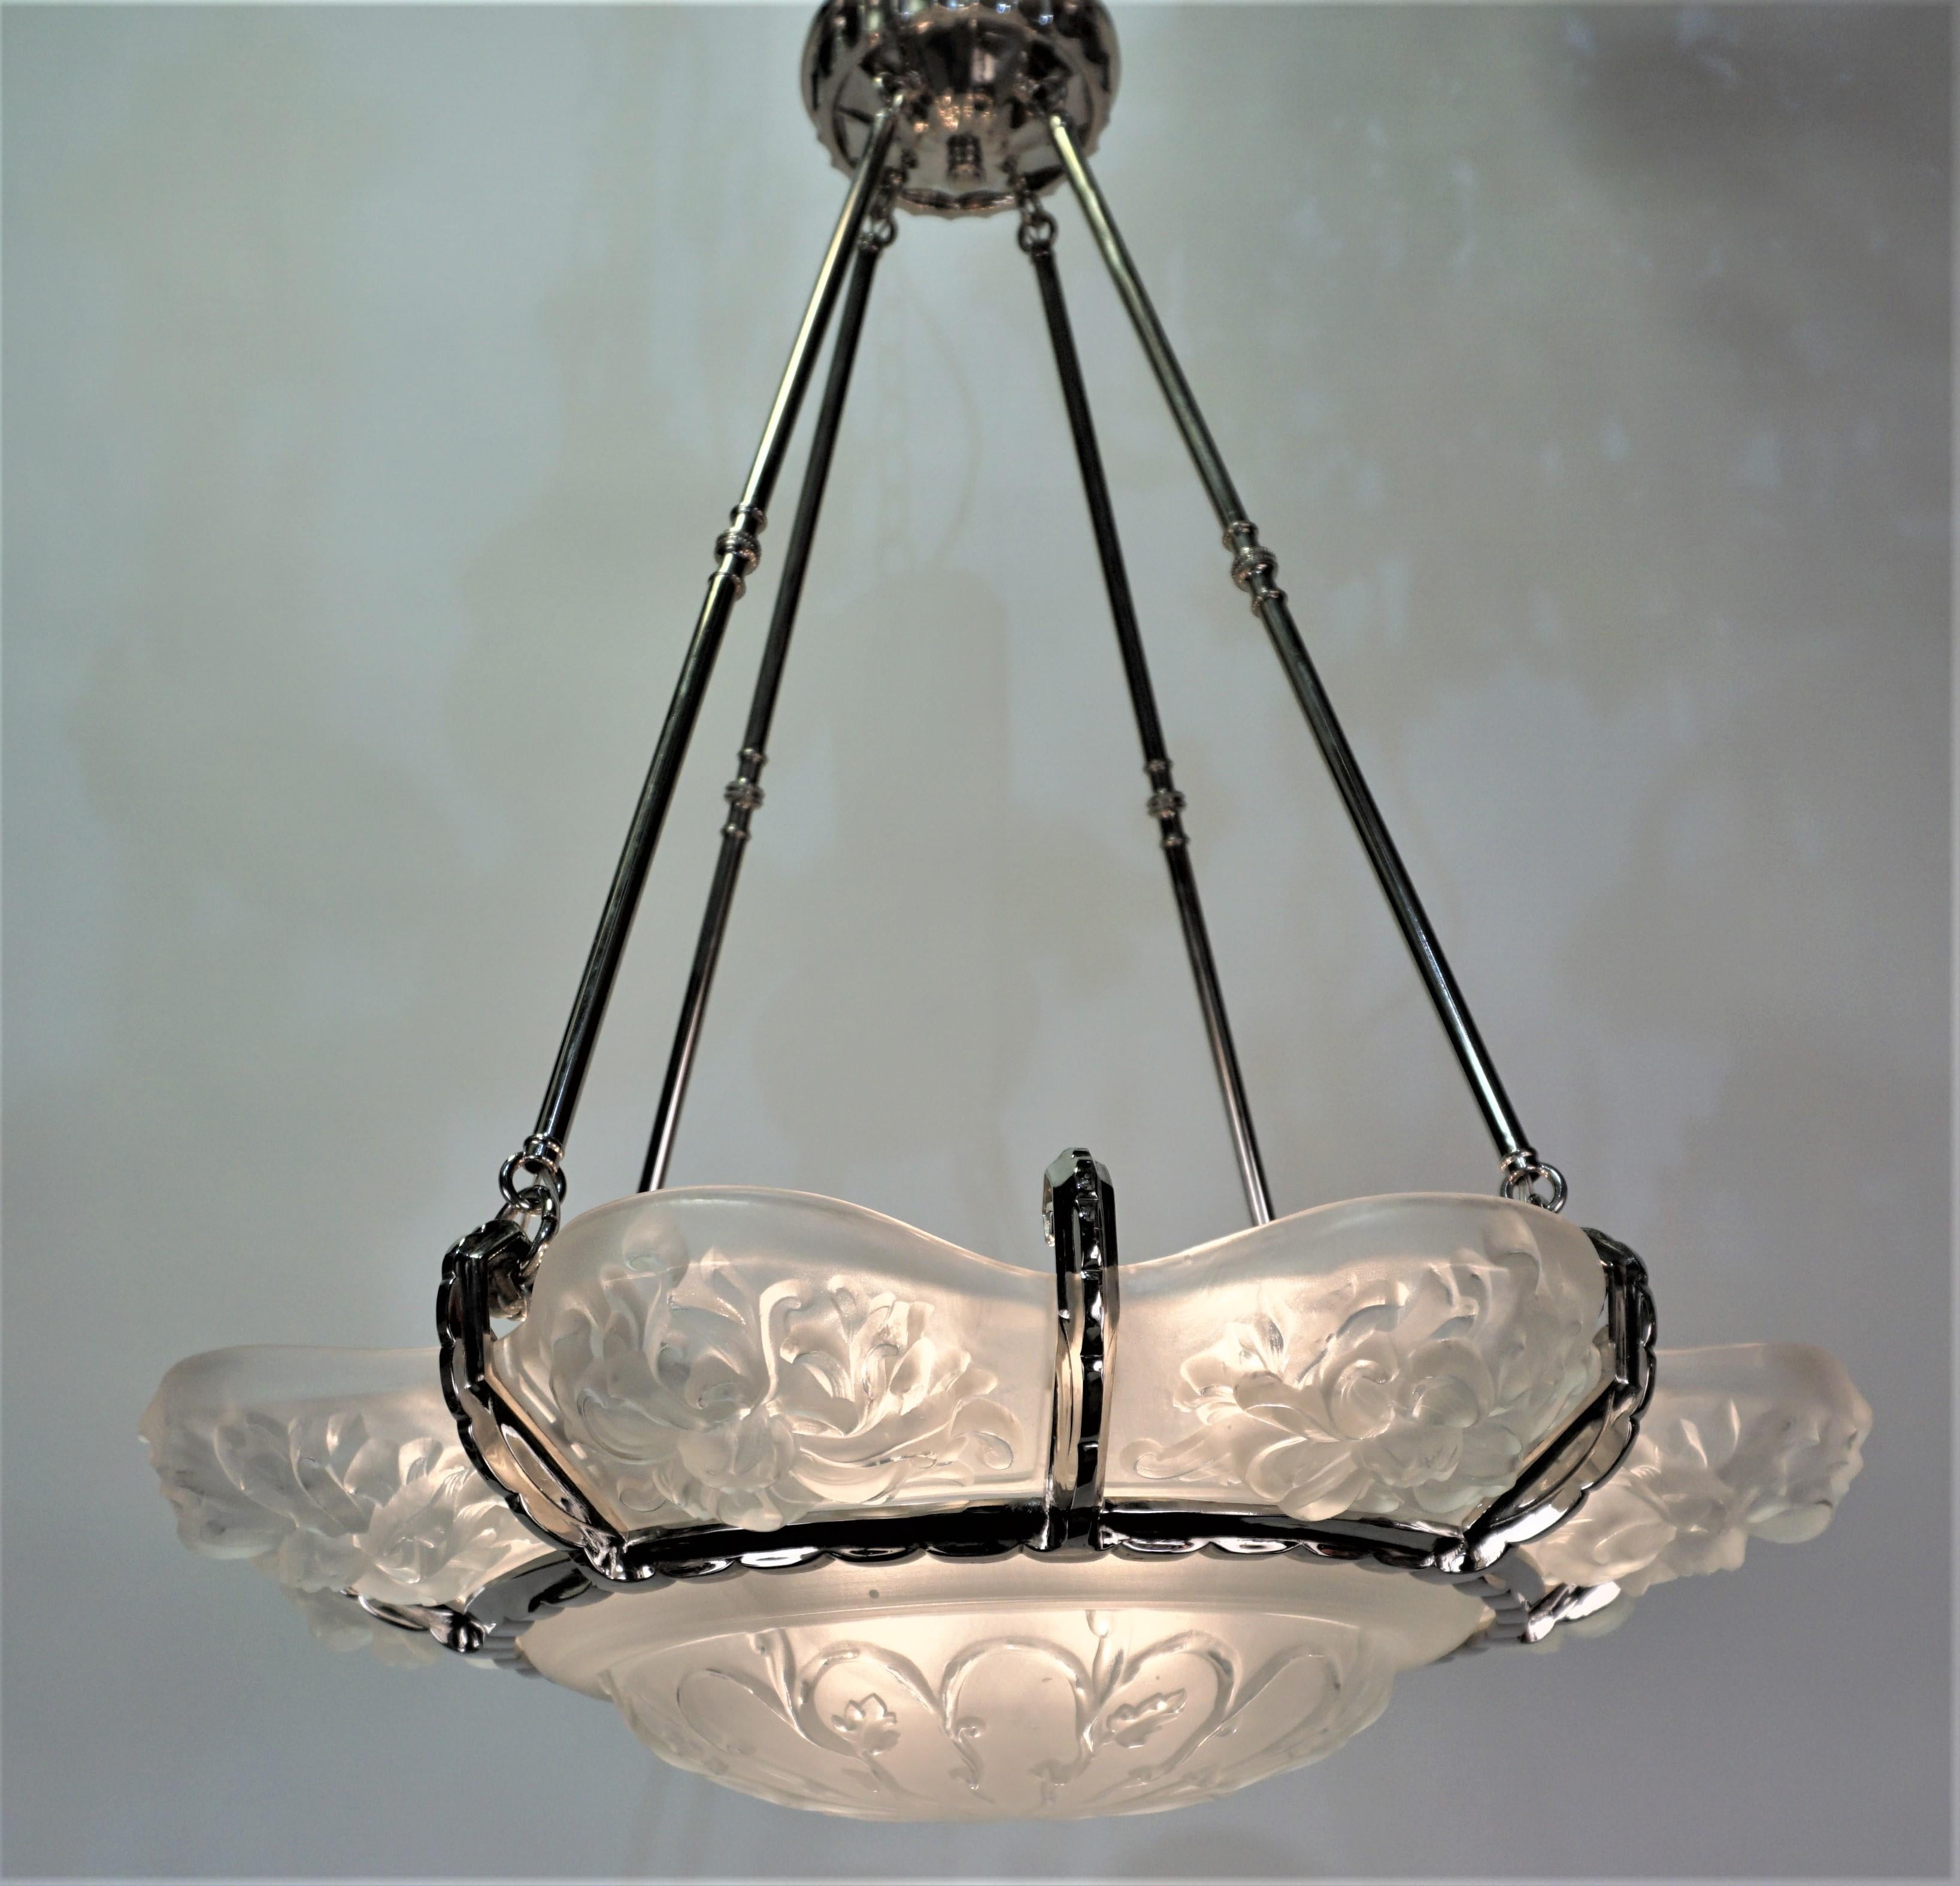 French Art Deco Chandelier by Sabino In Good Condition For Sale In Fairfax, VA